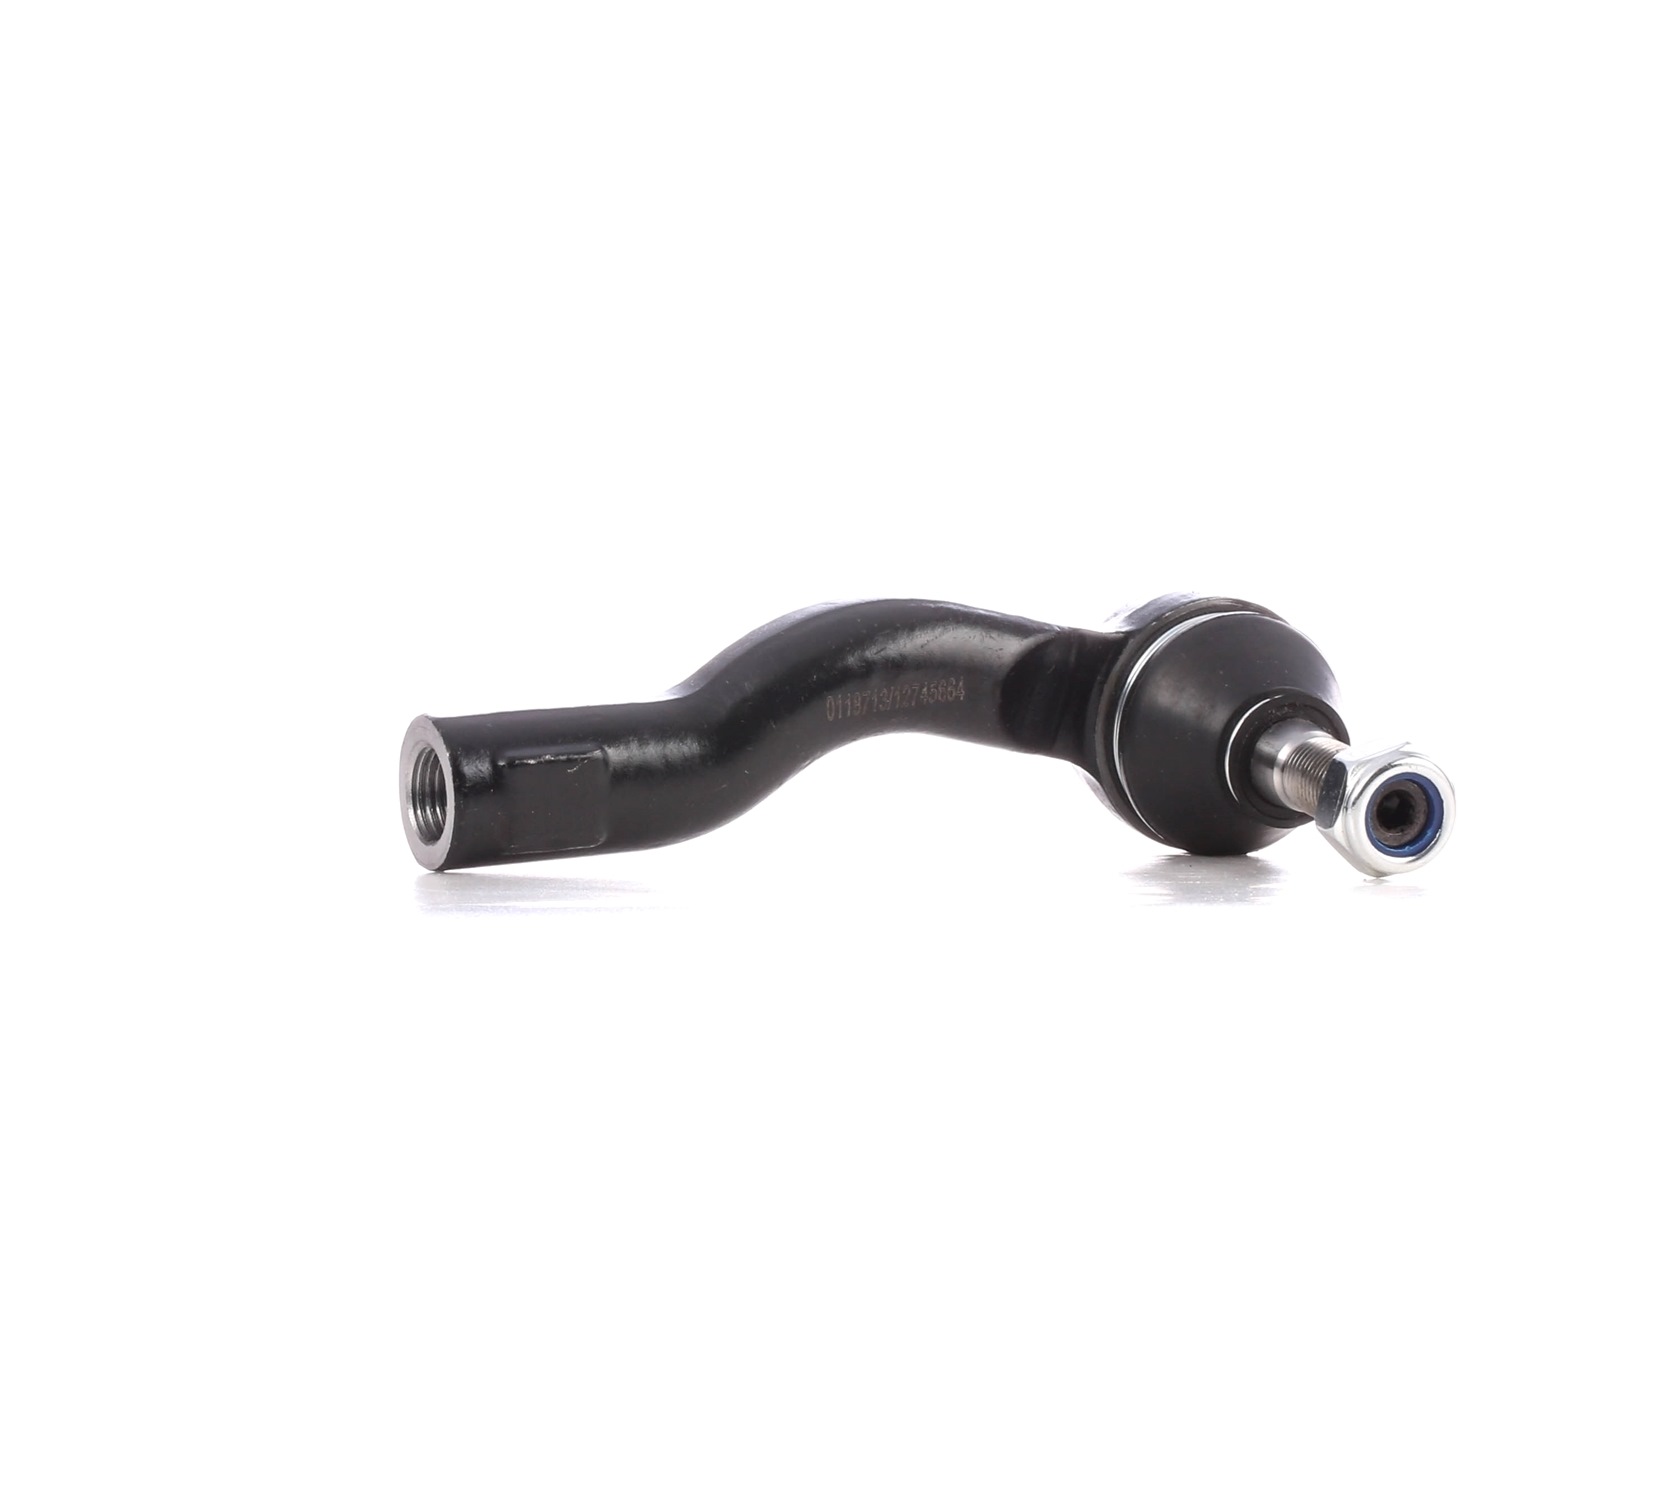 STARK SKTE-0280466 Track rod end Cone Size 12,5 mm, M12X1.25, M12x1.25 mm, Front Axle Left, with accessories